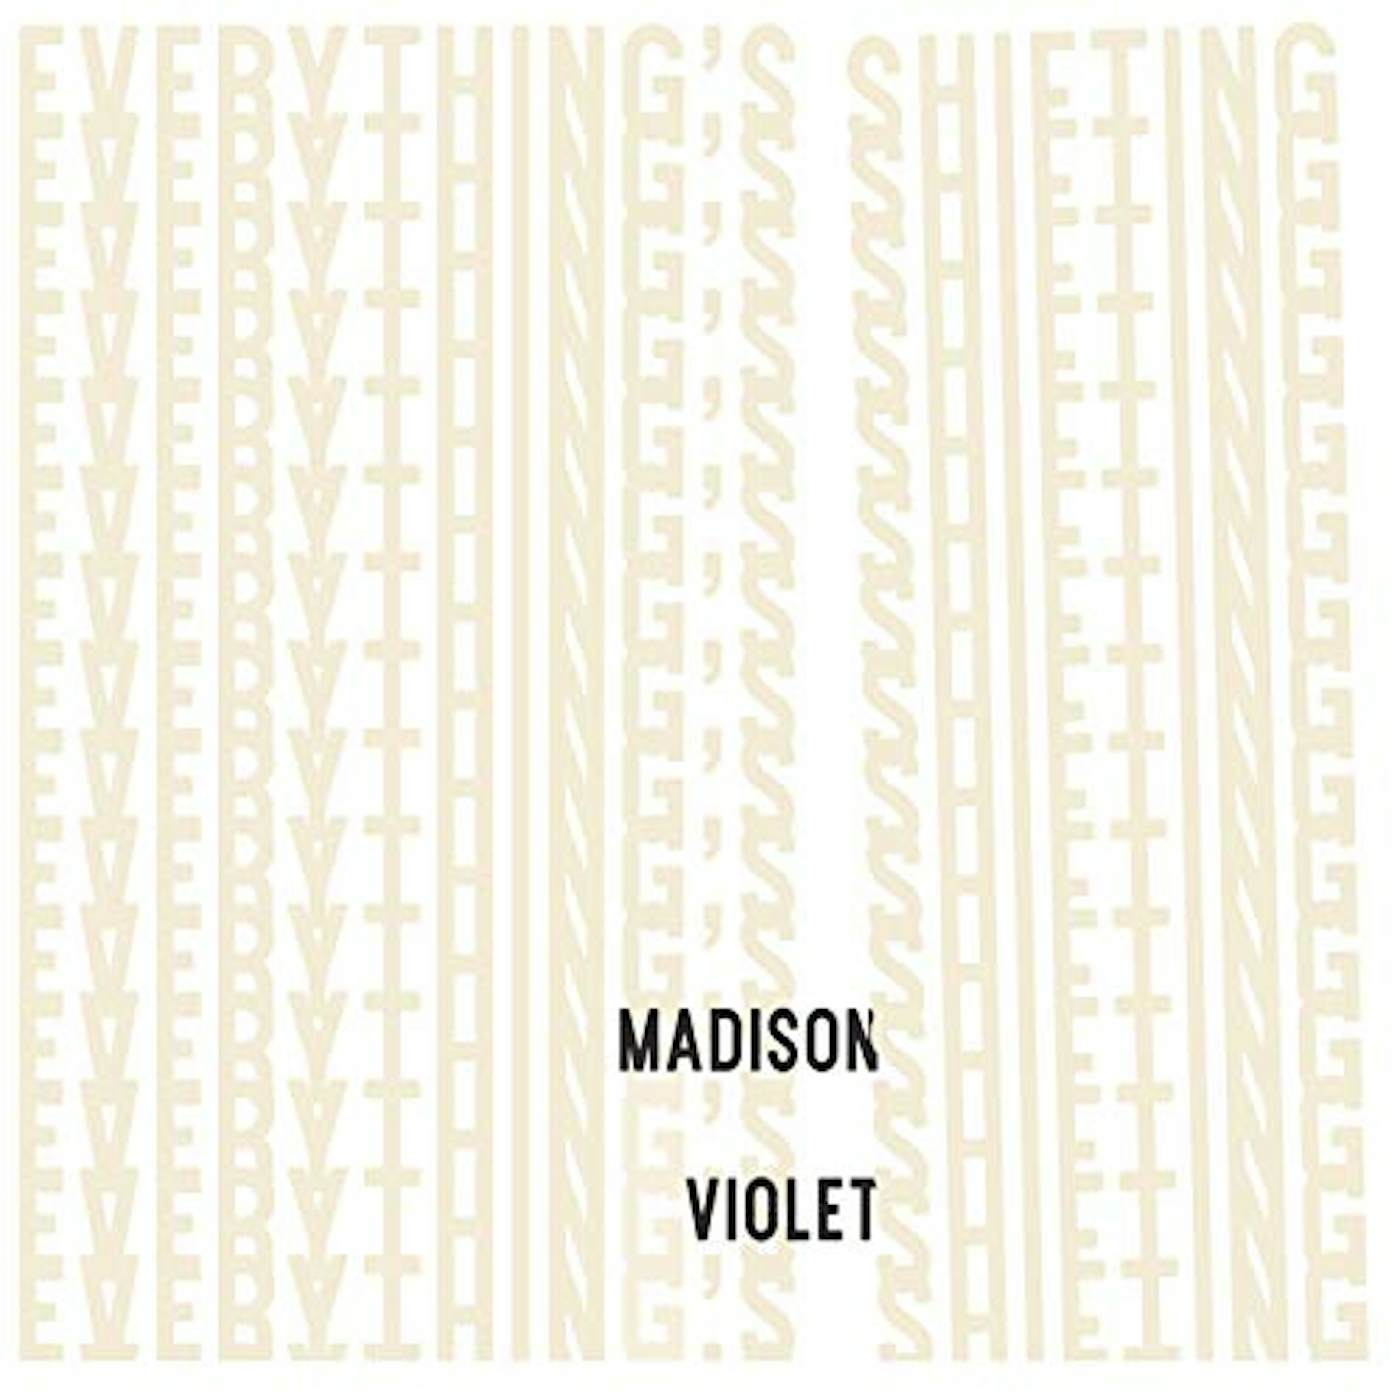 Madison Violet EVERYTHING'S SHIFTING CD